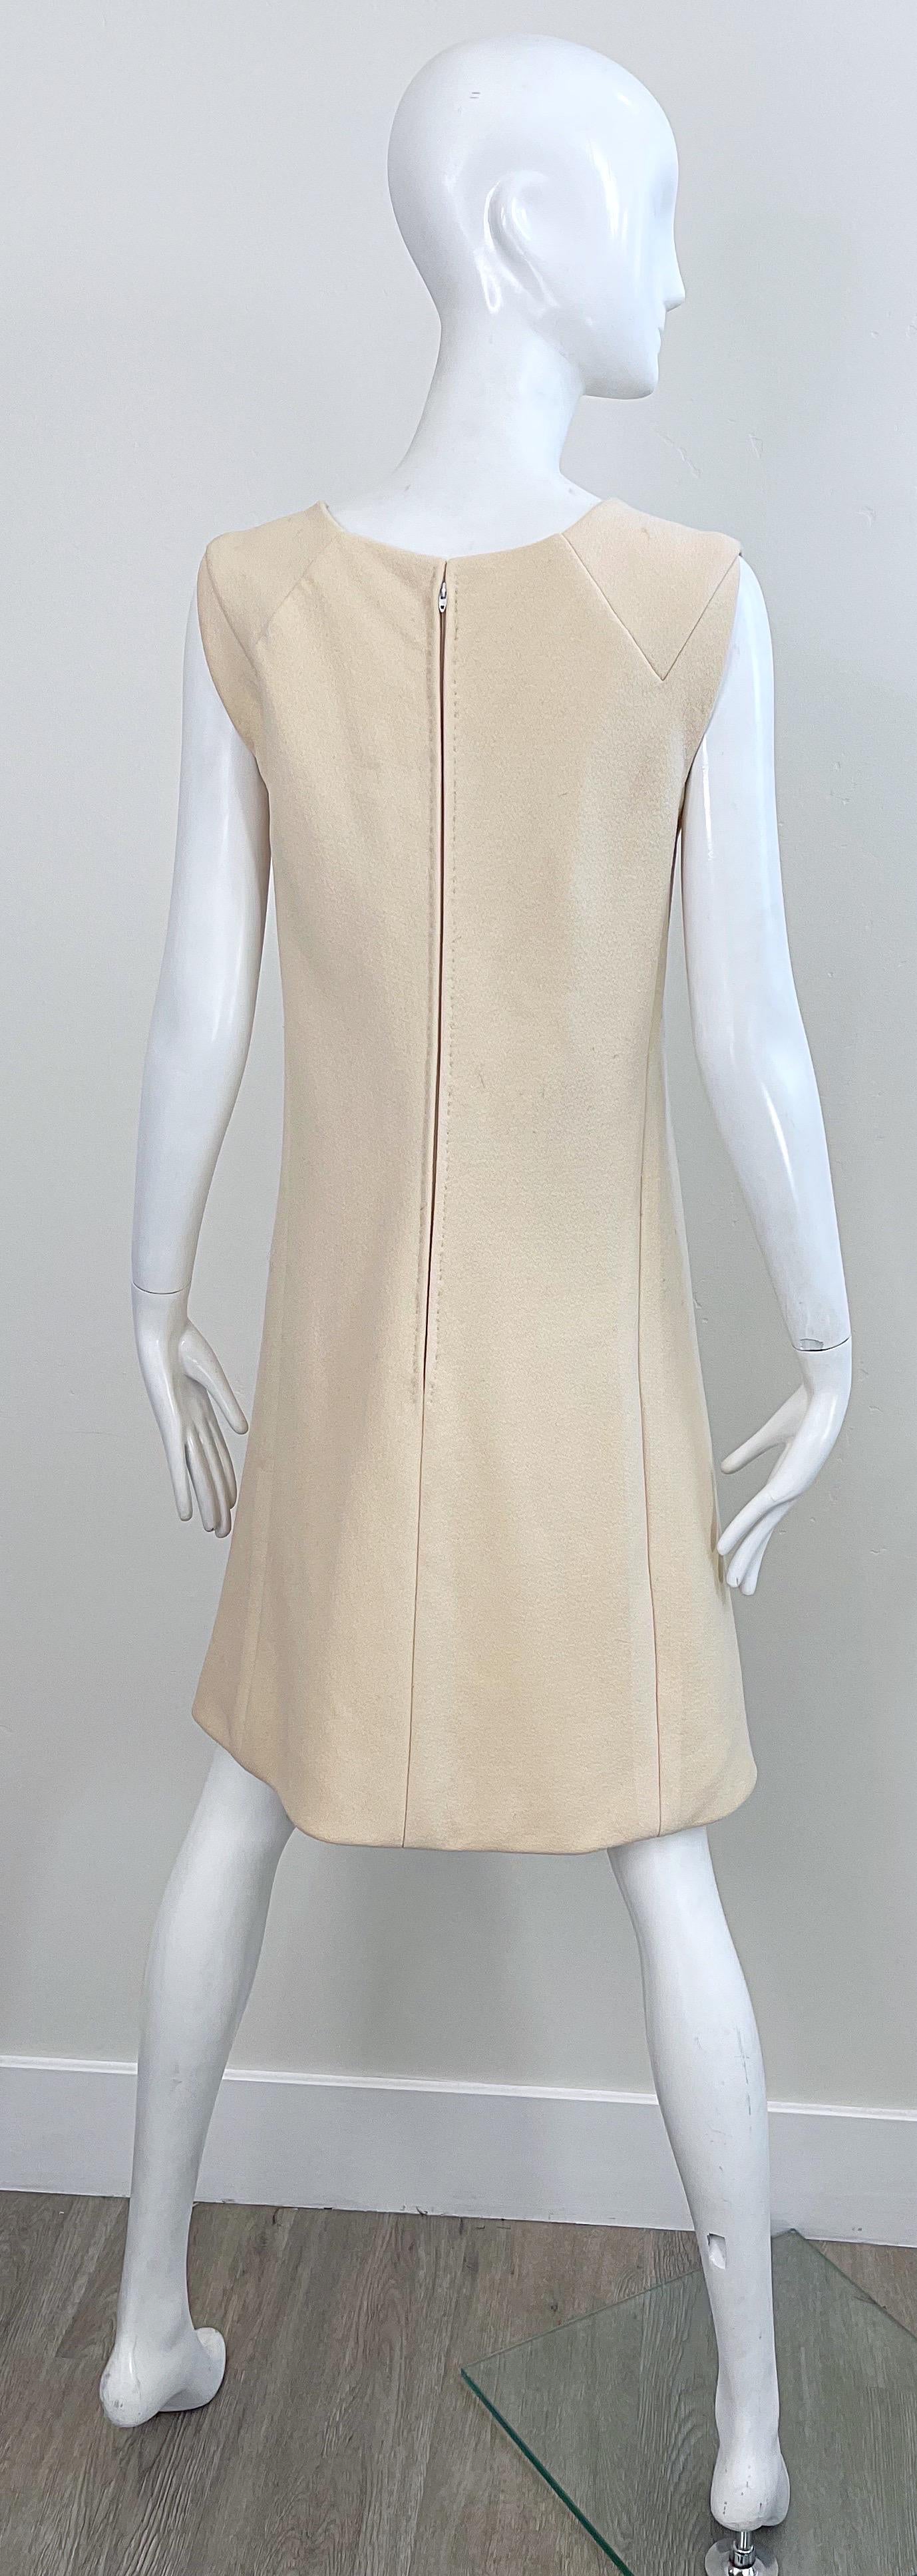 Pauline Trigere 1960s Ivory Off White Sleeveless Vintage Wool A - Line 60s Dress For Sale 7